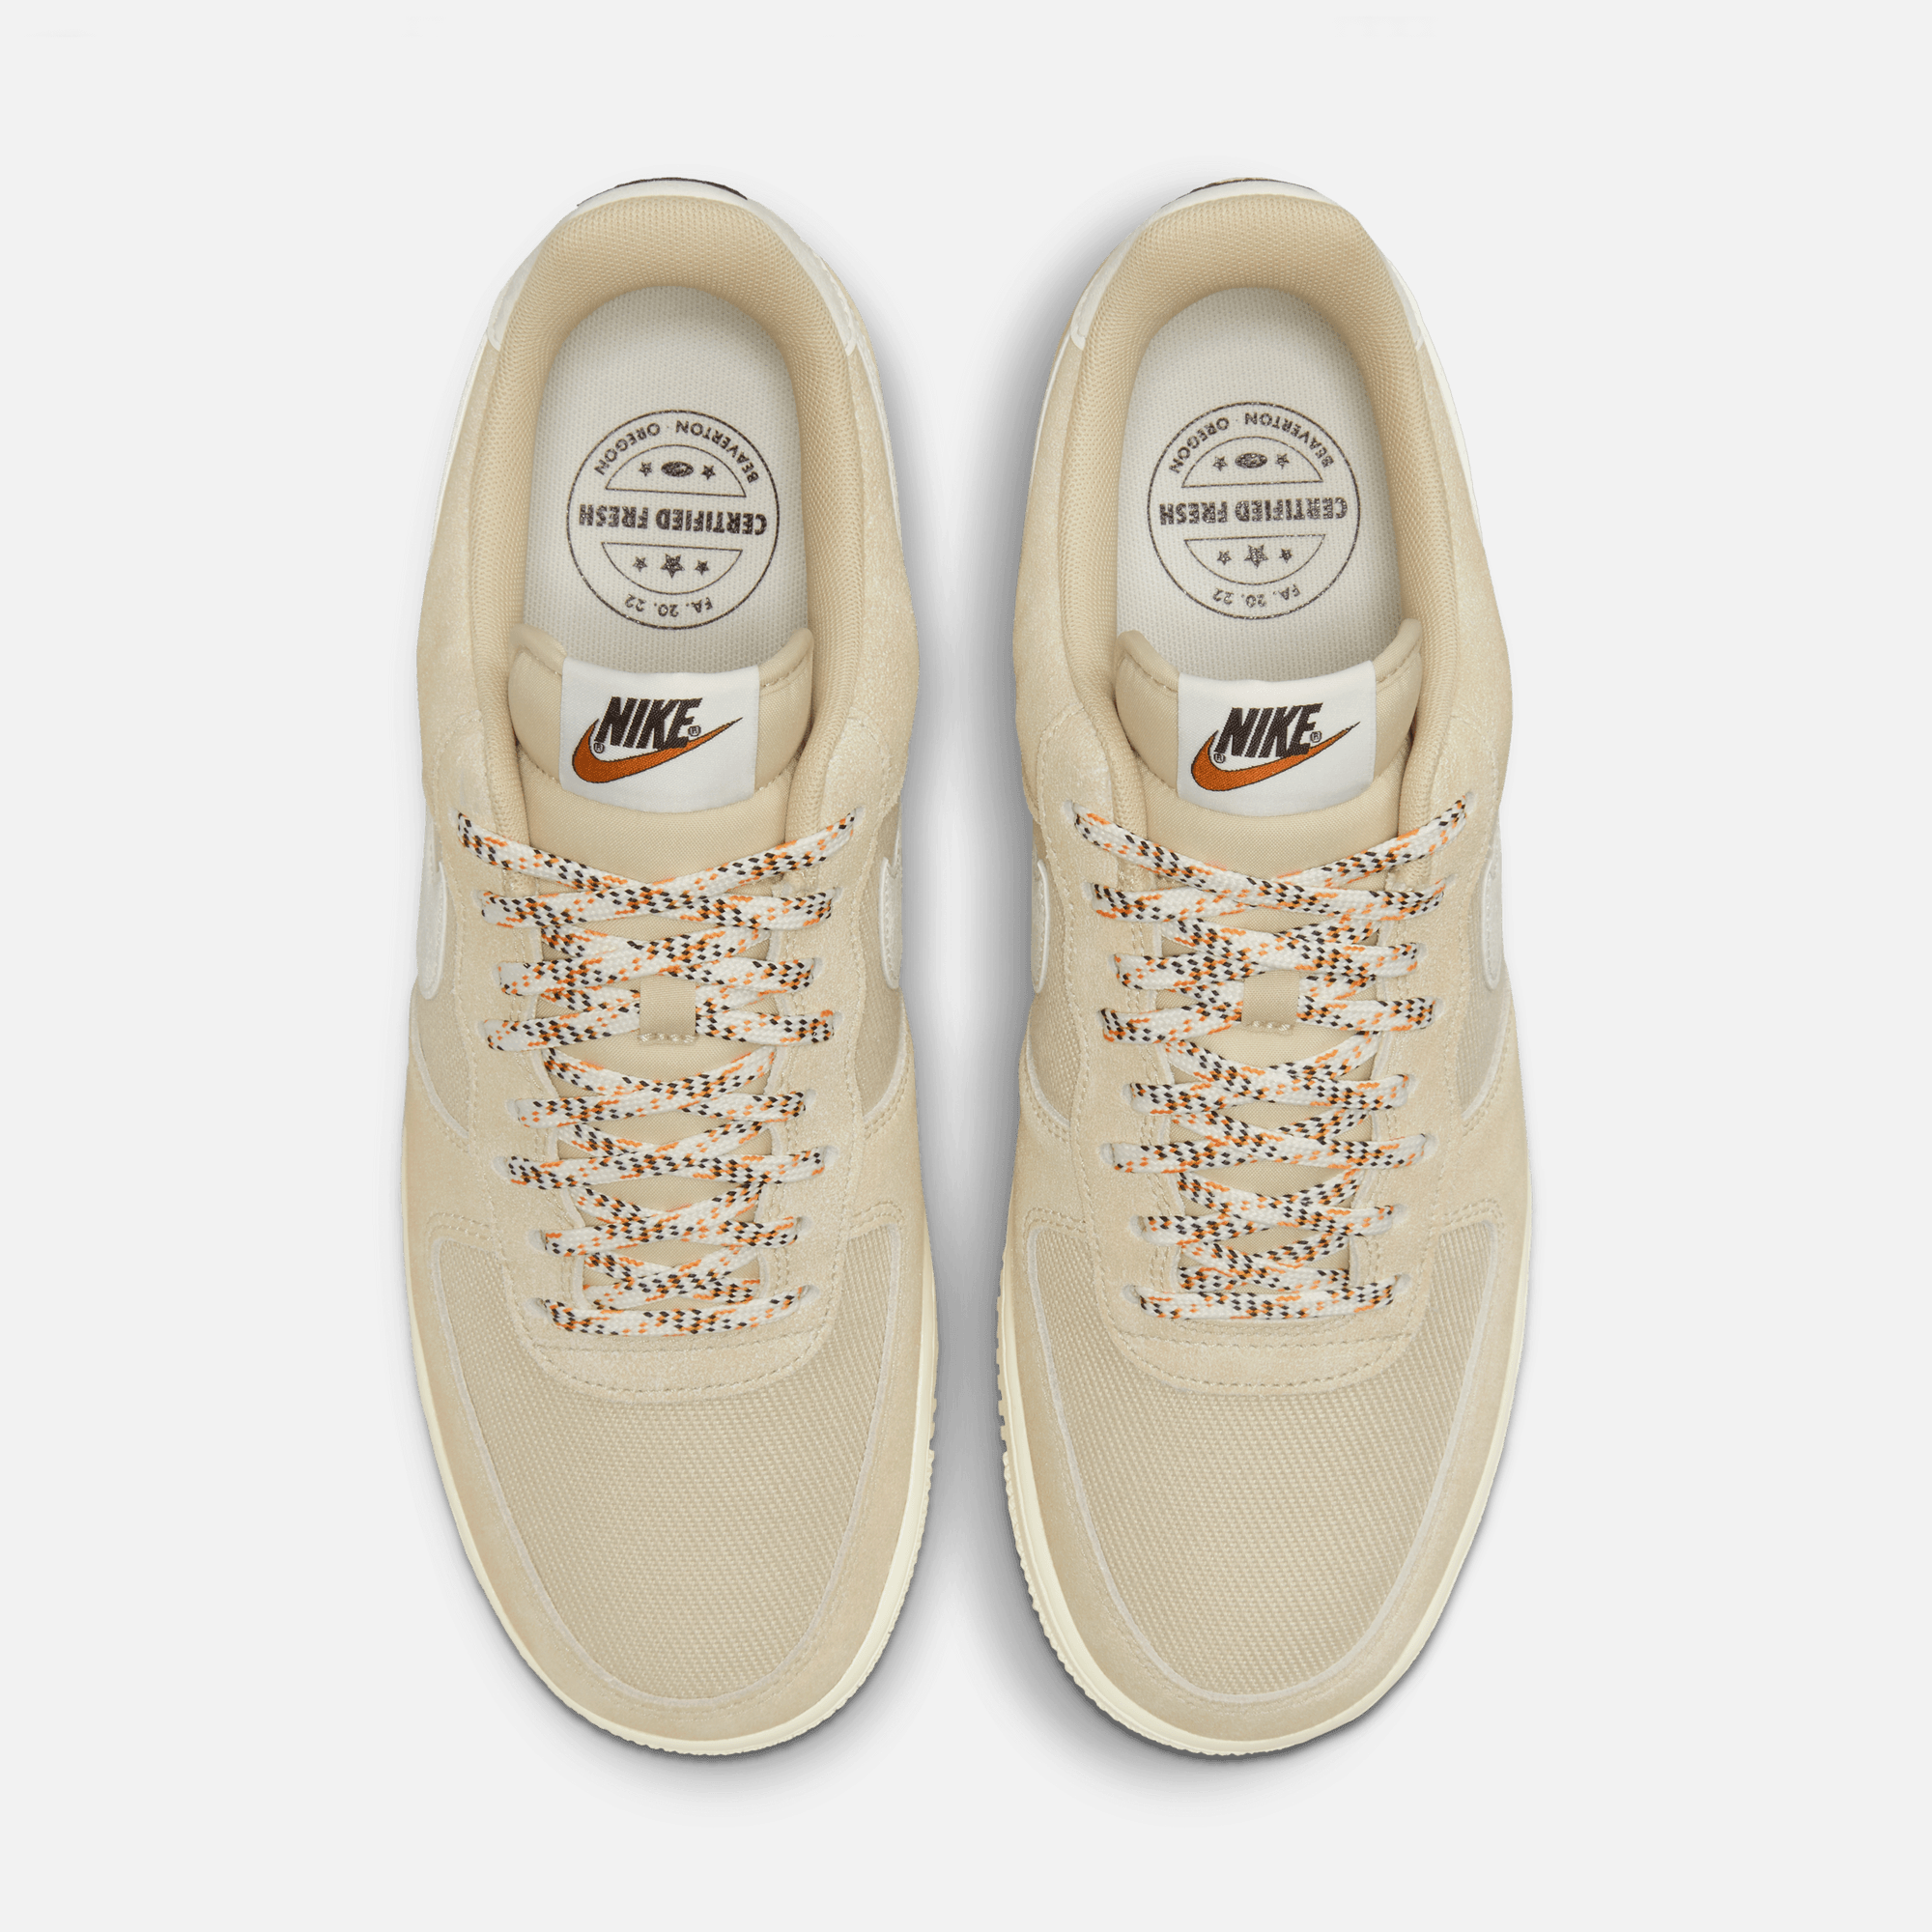 Nike Air Force 1 '07 Lv8 Suede And Canvas Sneakers In Rattan/sail